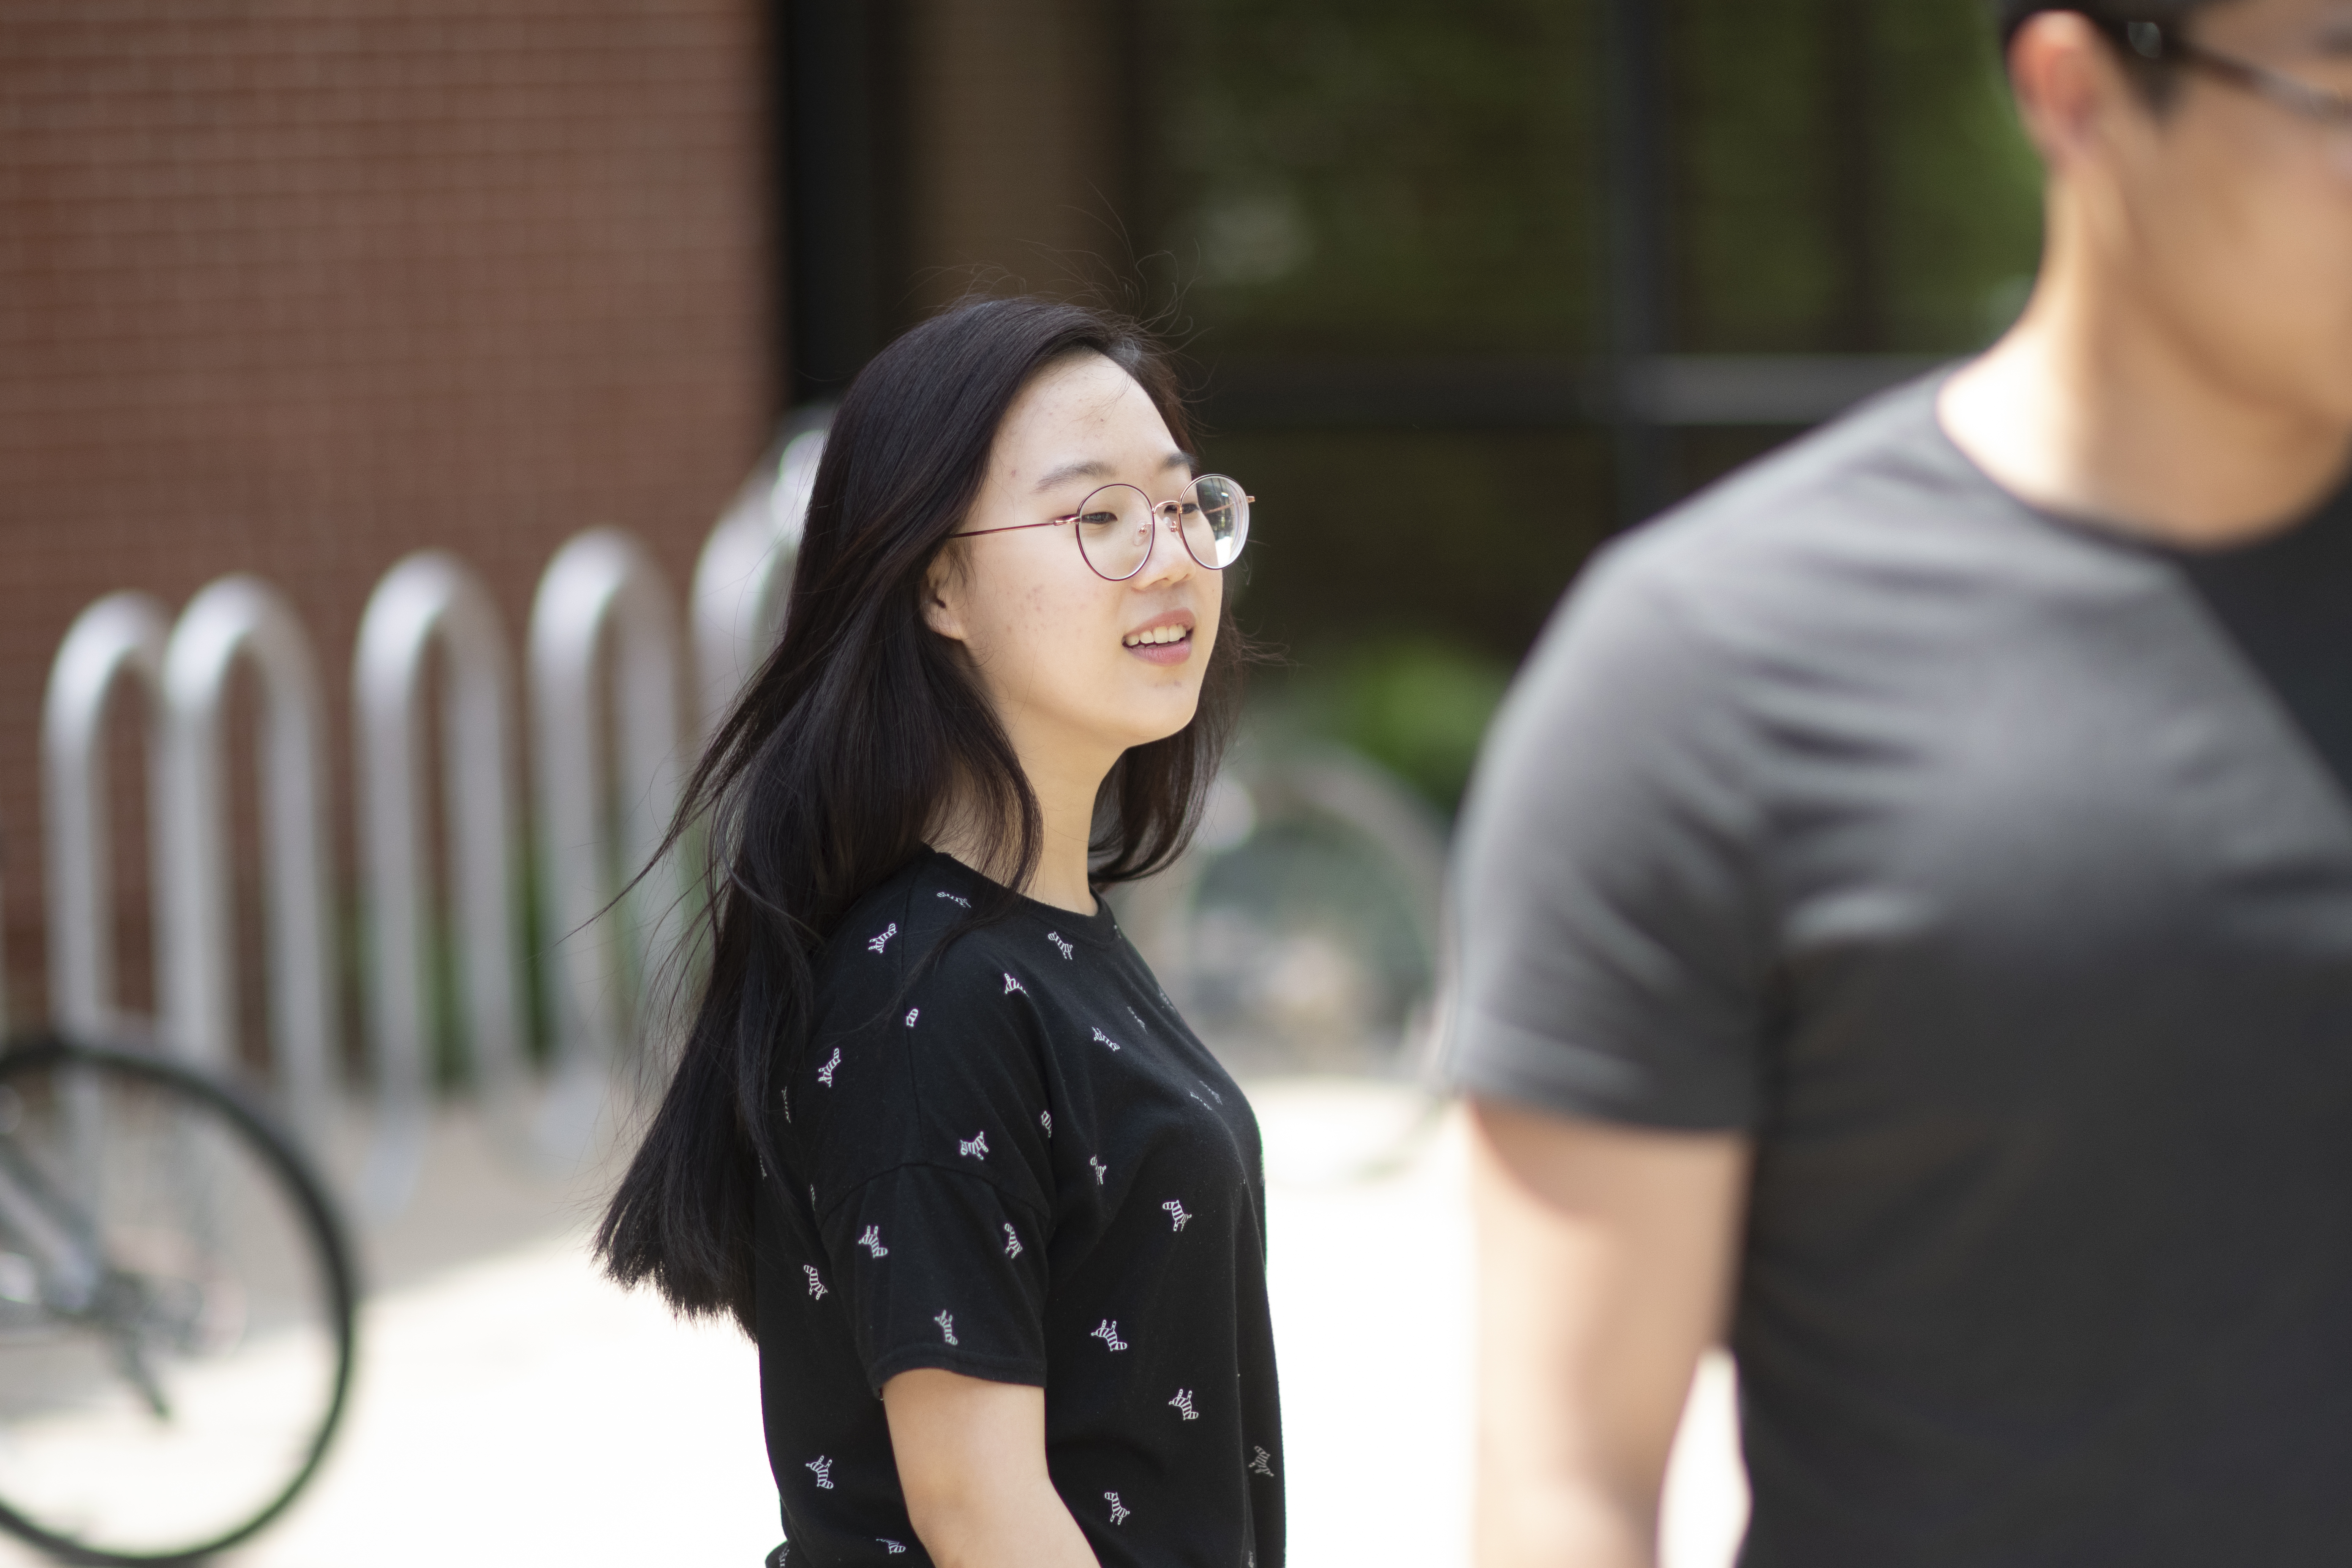 A picture of a student with black hair and glasses